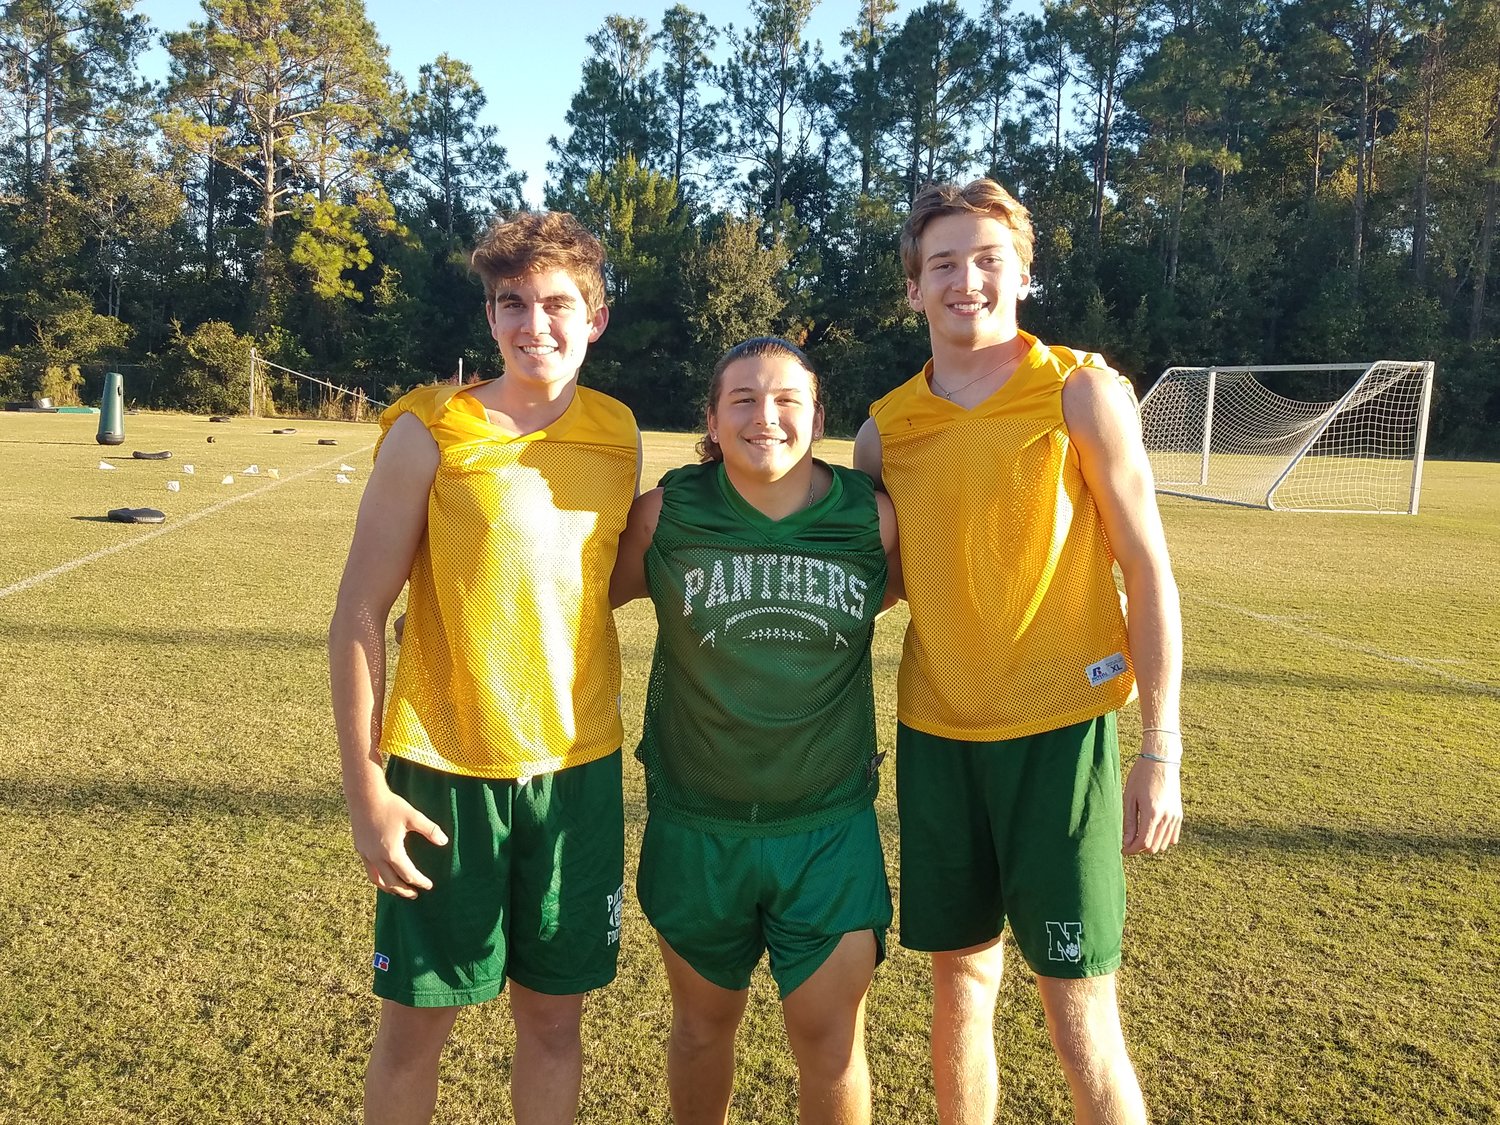 The trio of kicker Cannon Kimball, long snapper Ethan Sheider and punter Evan Crenshaw combined for a perfectly executed field goal in the clutch to beat Port Orange Spruce Creek.